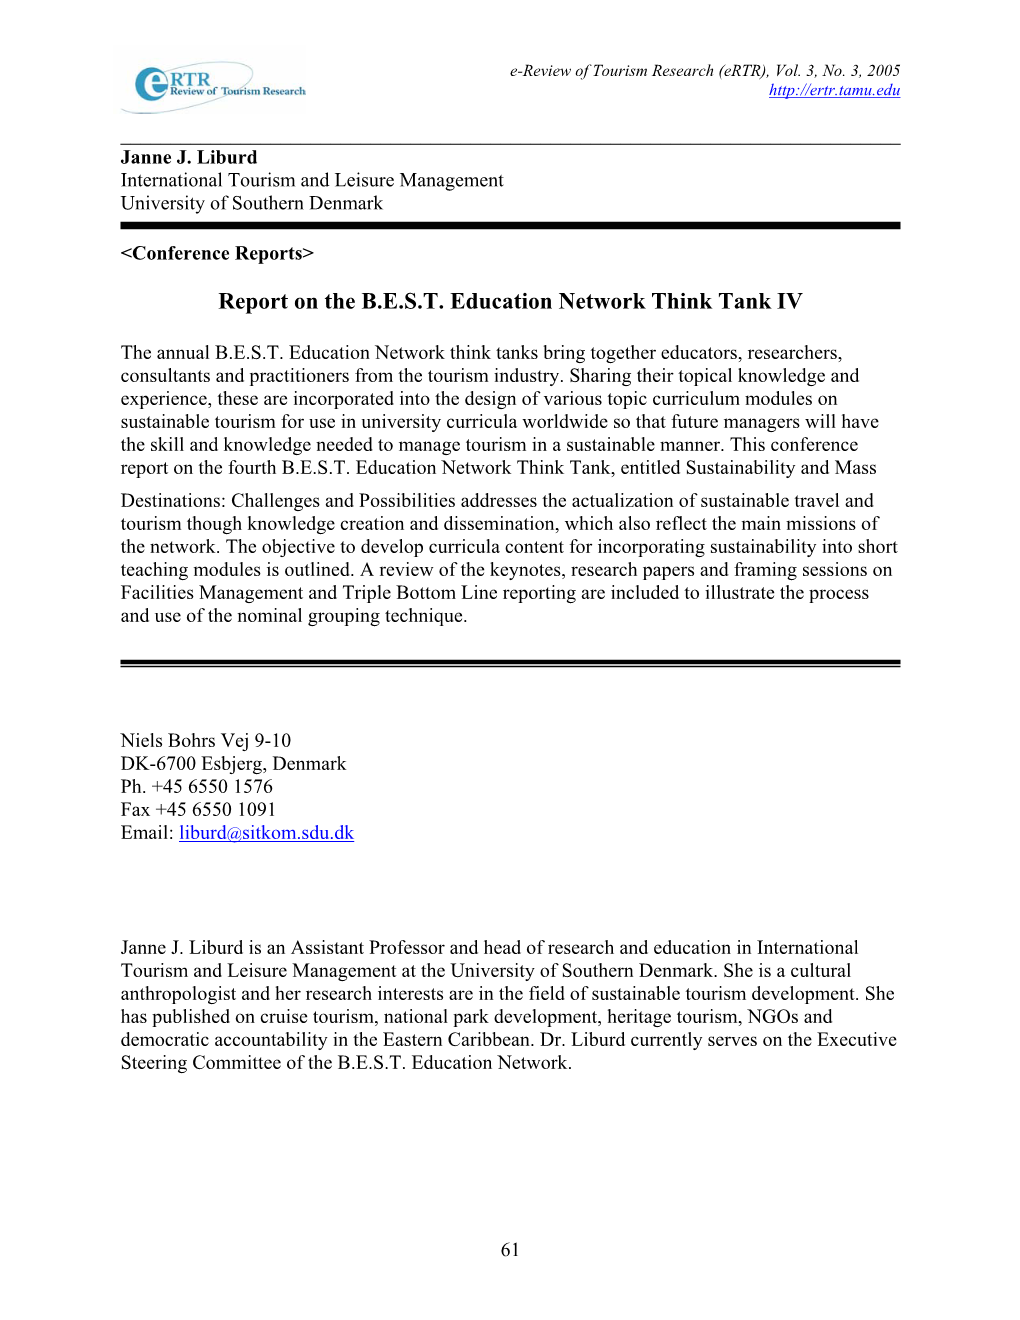 Report on the B.E.S.T. Education Network Think Tank IV